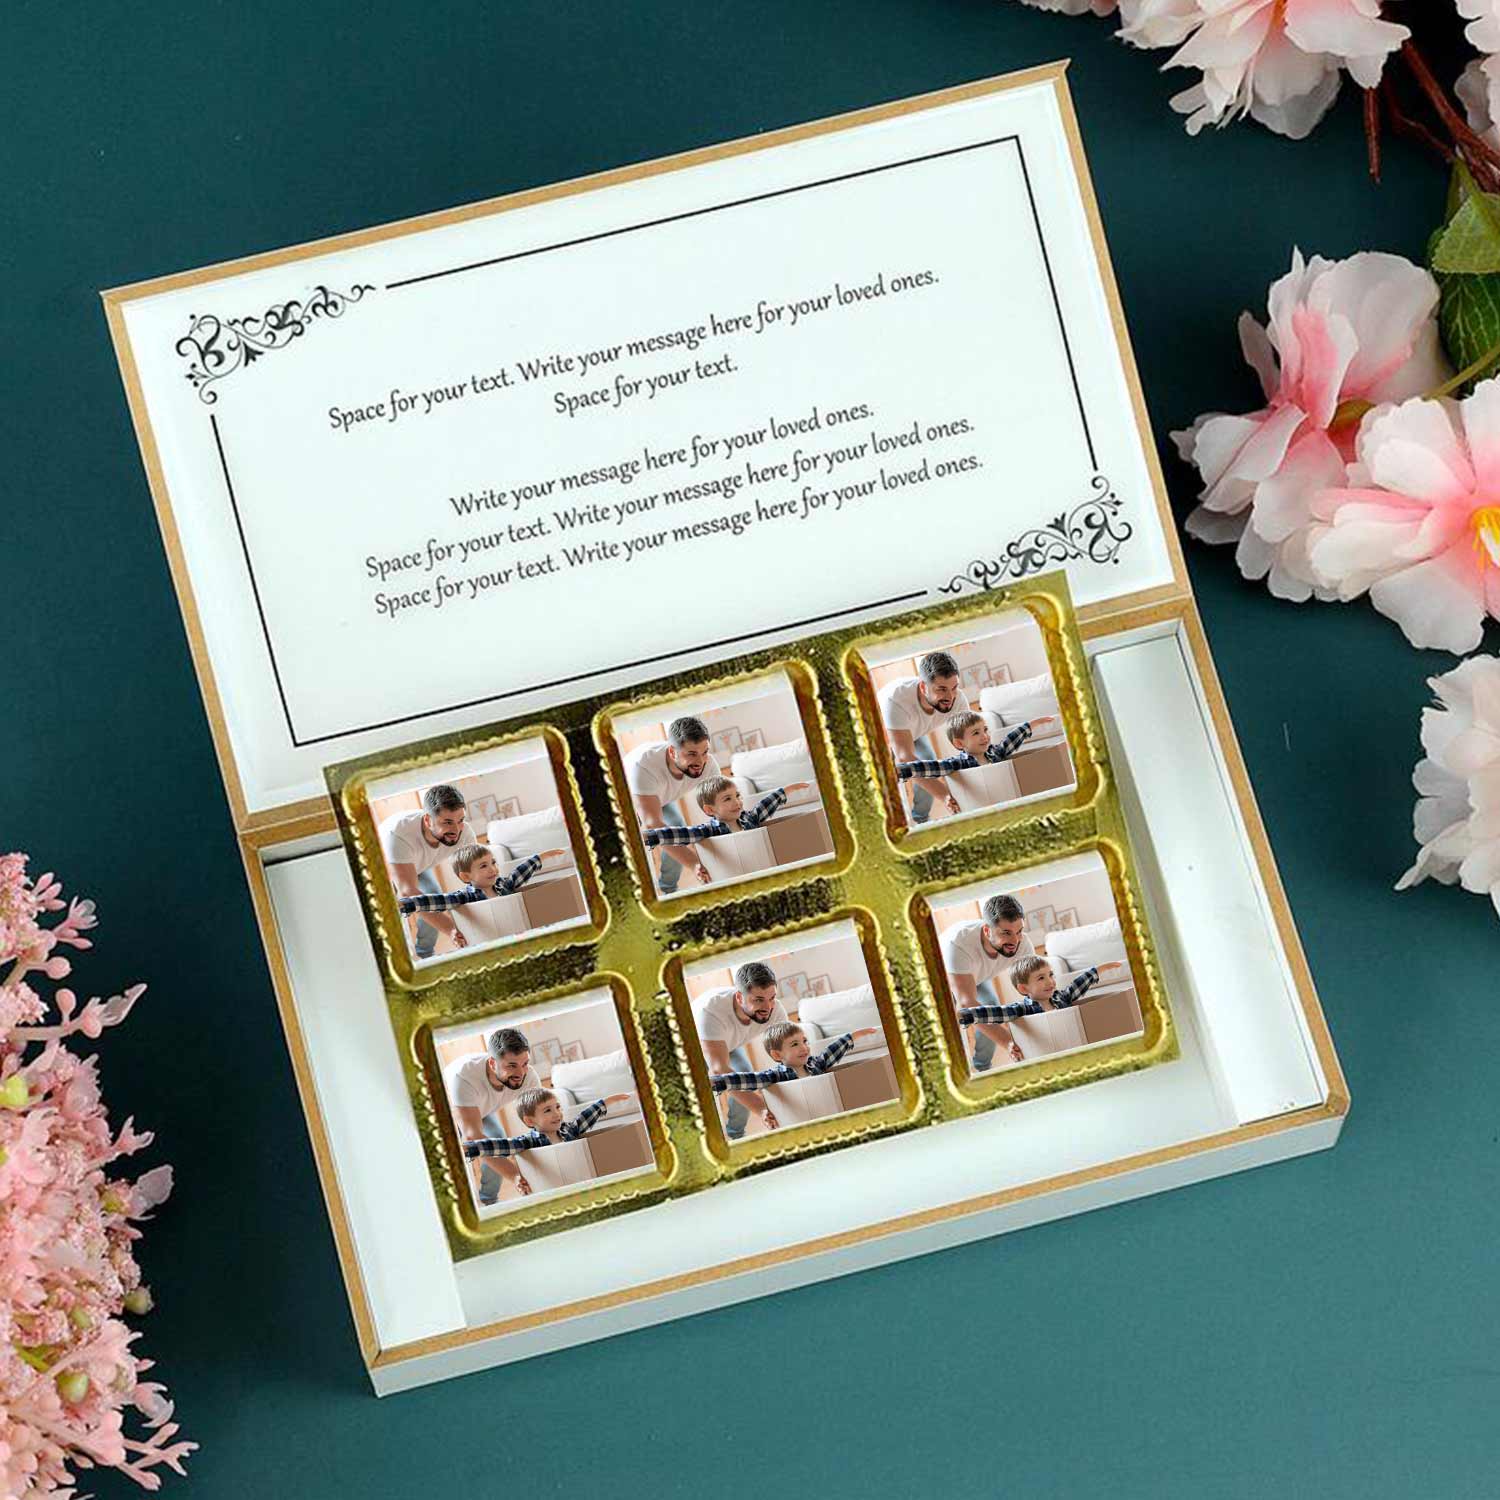 Father of the bride gift  Father's day gift box  Father's day gift ideas from wife.  Father birthday gift.  Father in law gift ideas.